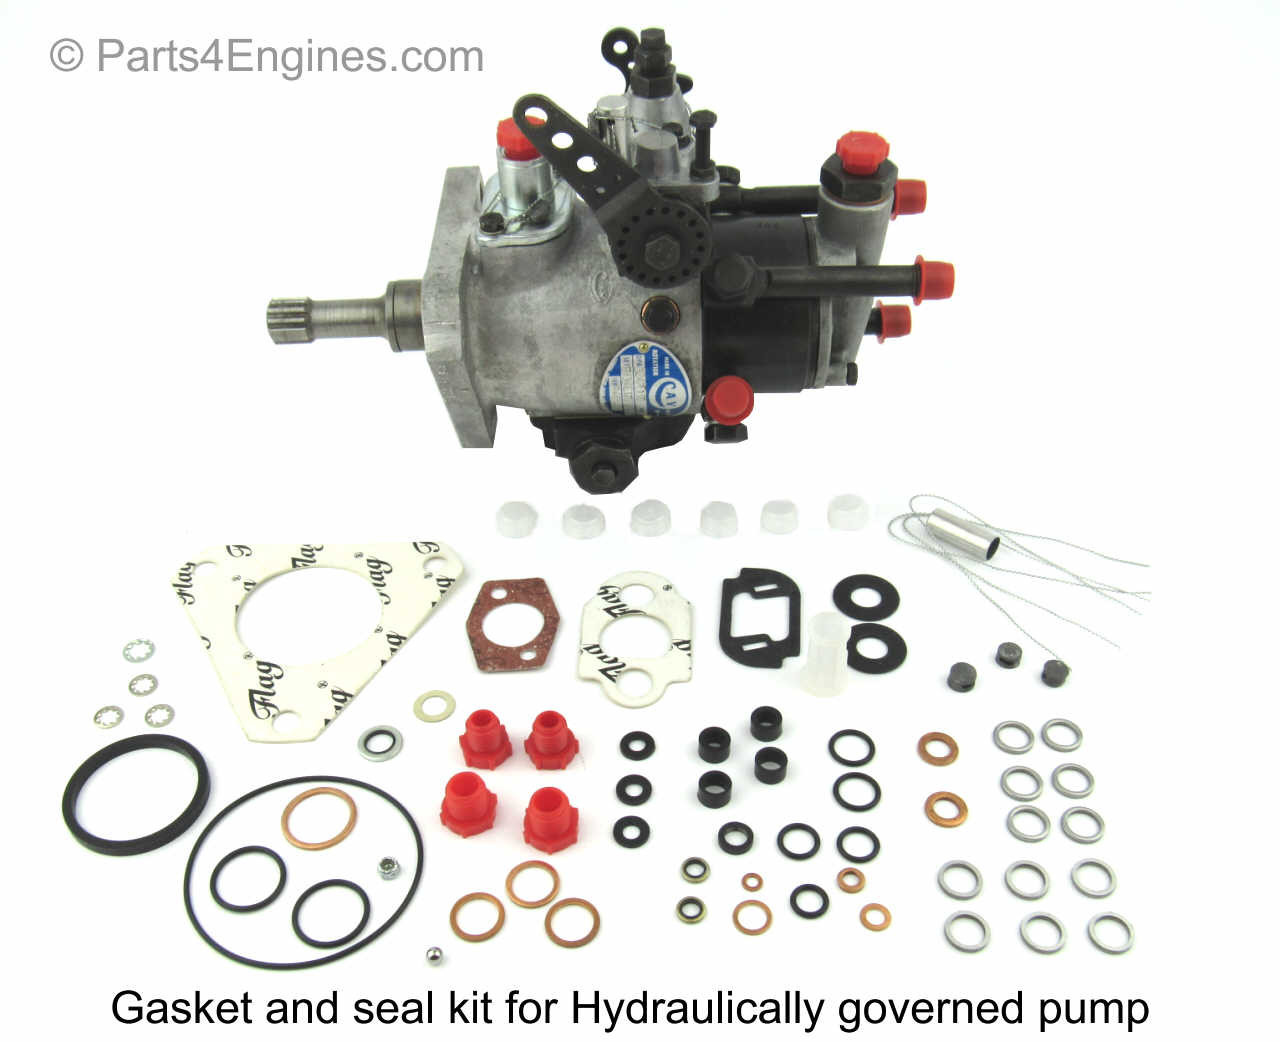 Perkins 4.154 Gasket & Seal Kit for Hydraulic Governed Injection Pump from parts4engines.com